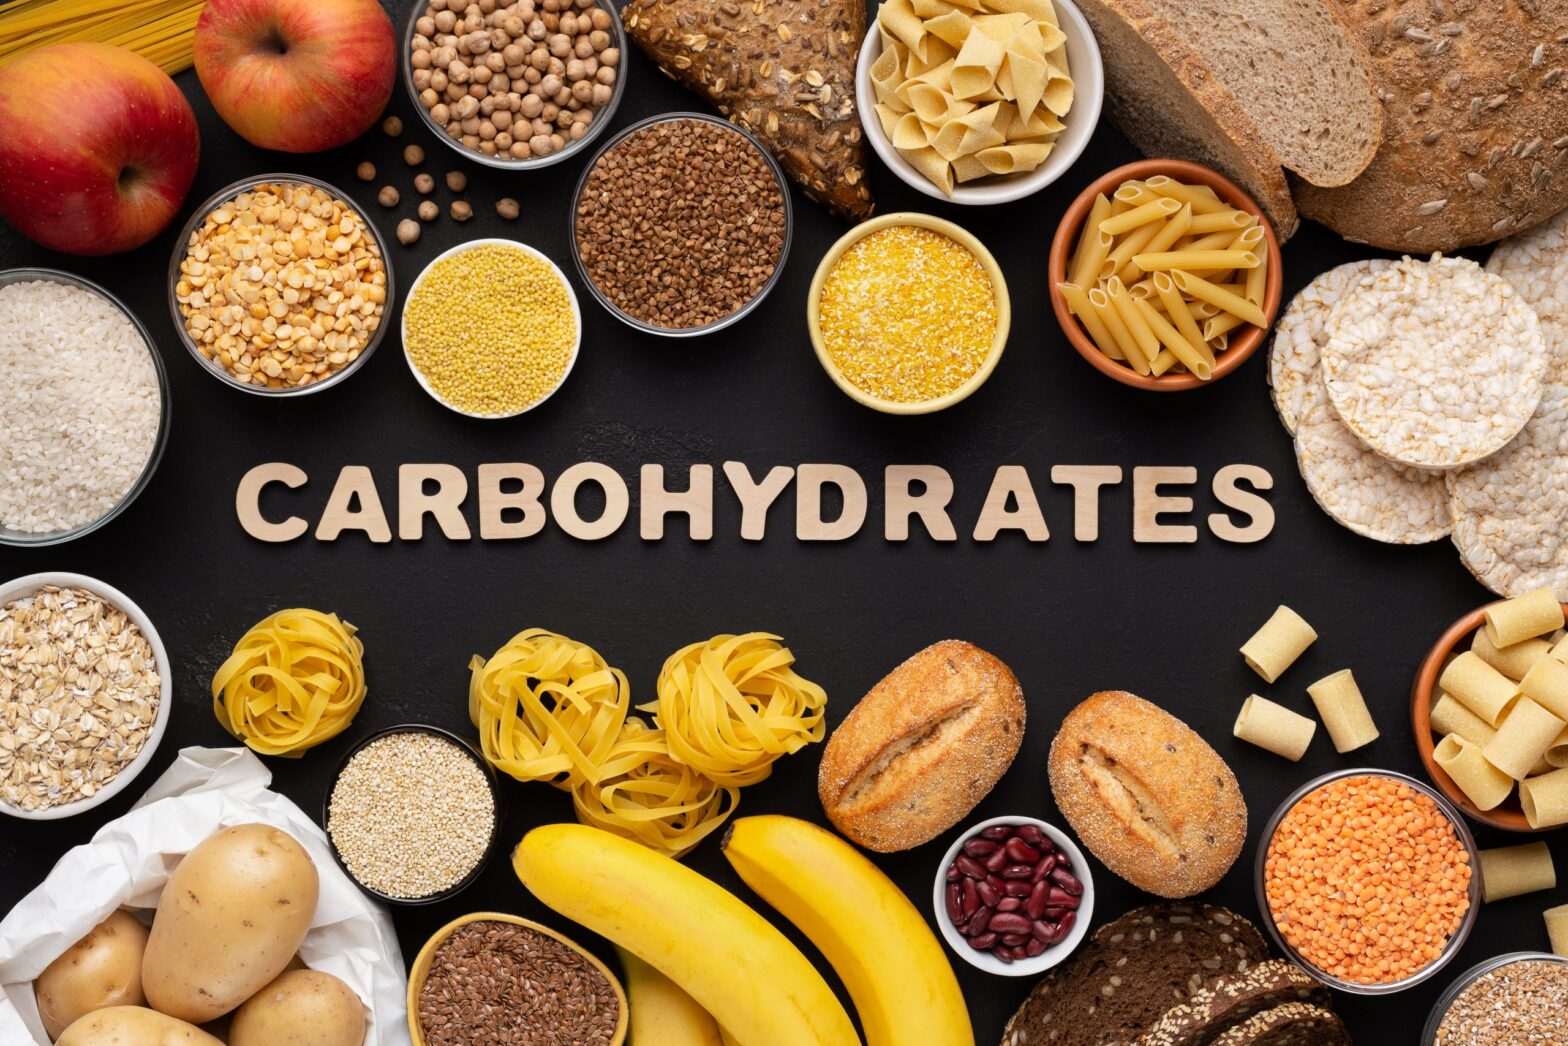 Refined Functional Carbohydrates Market